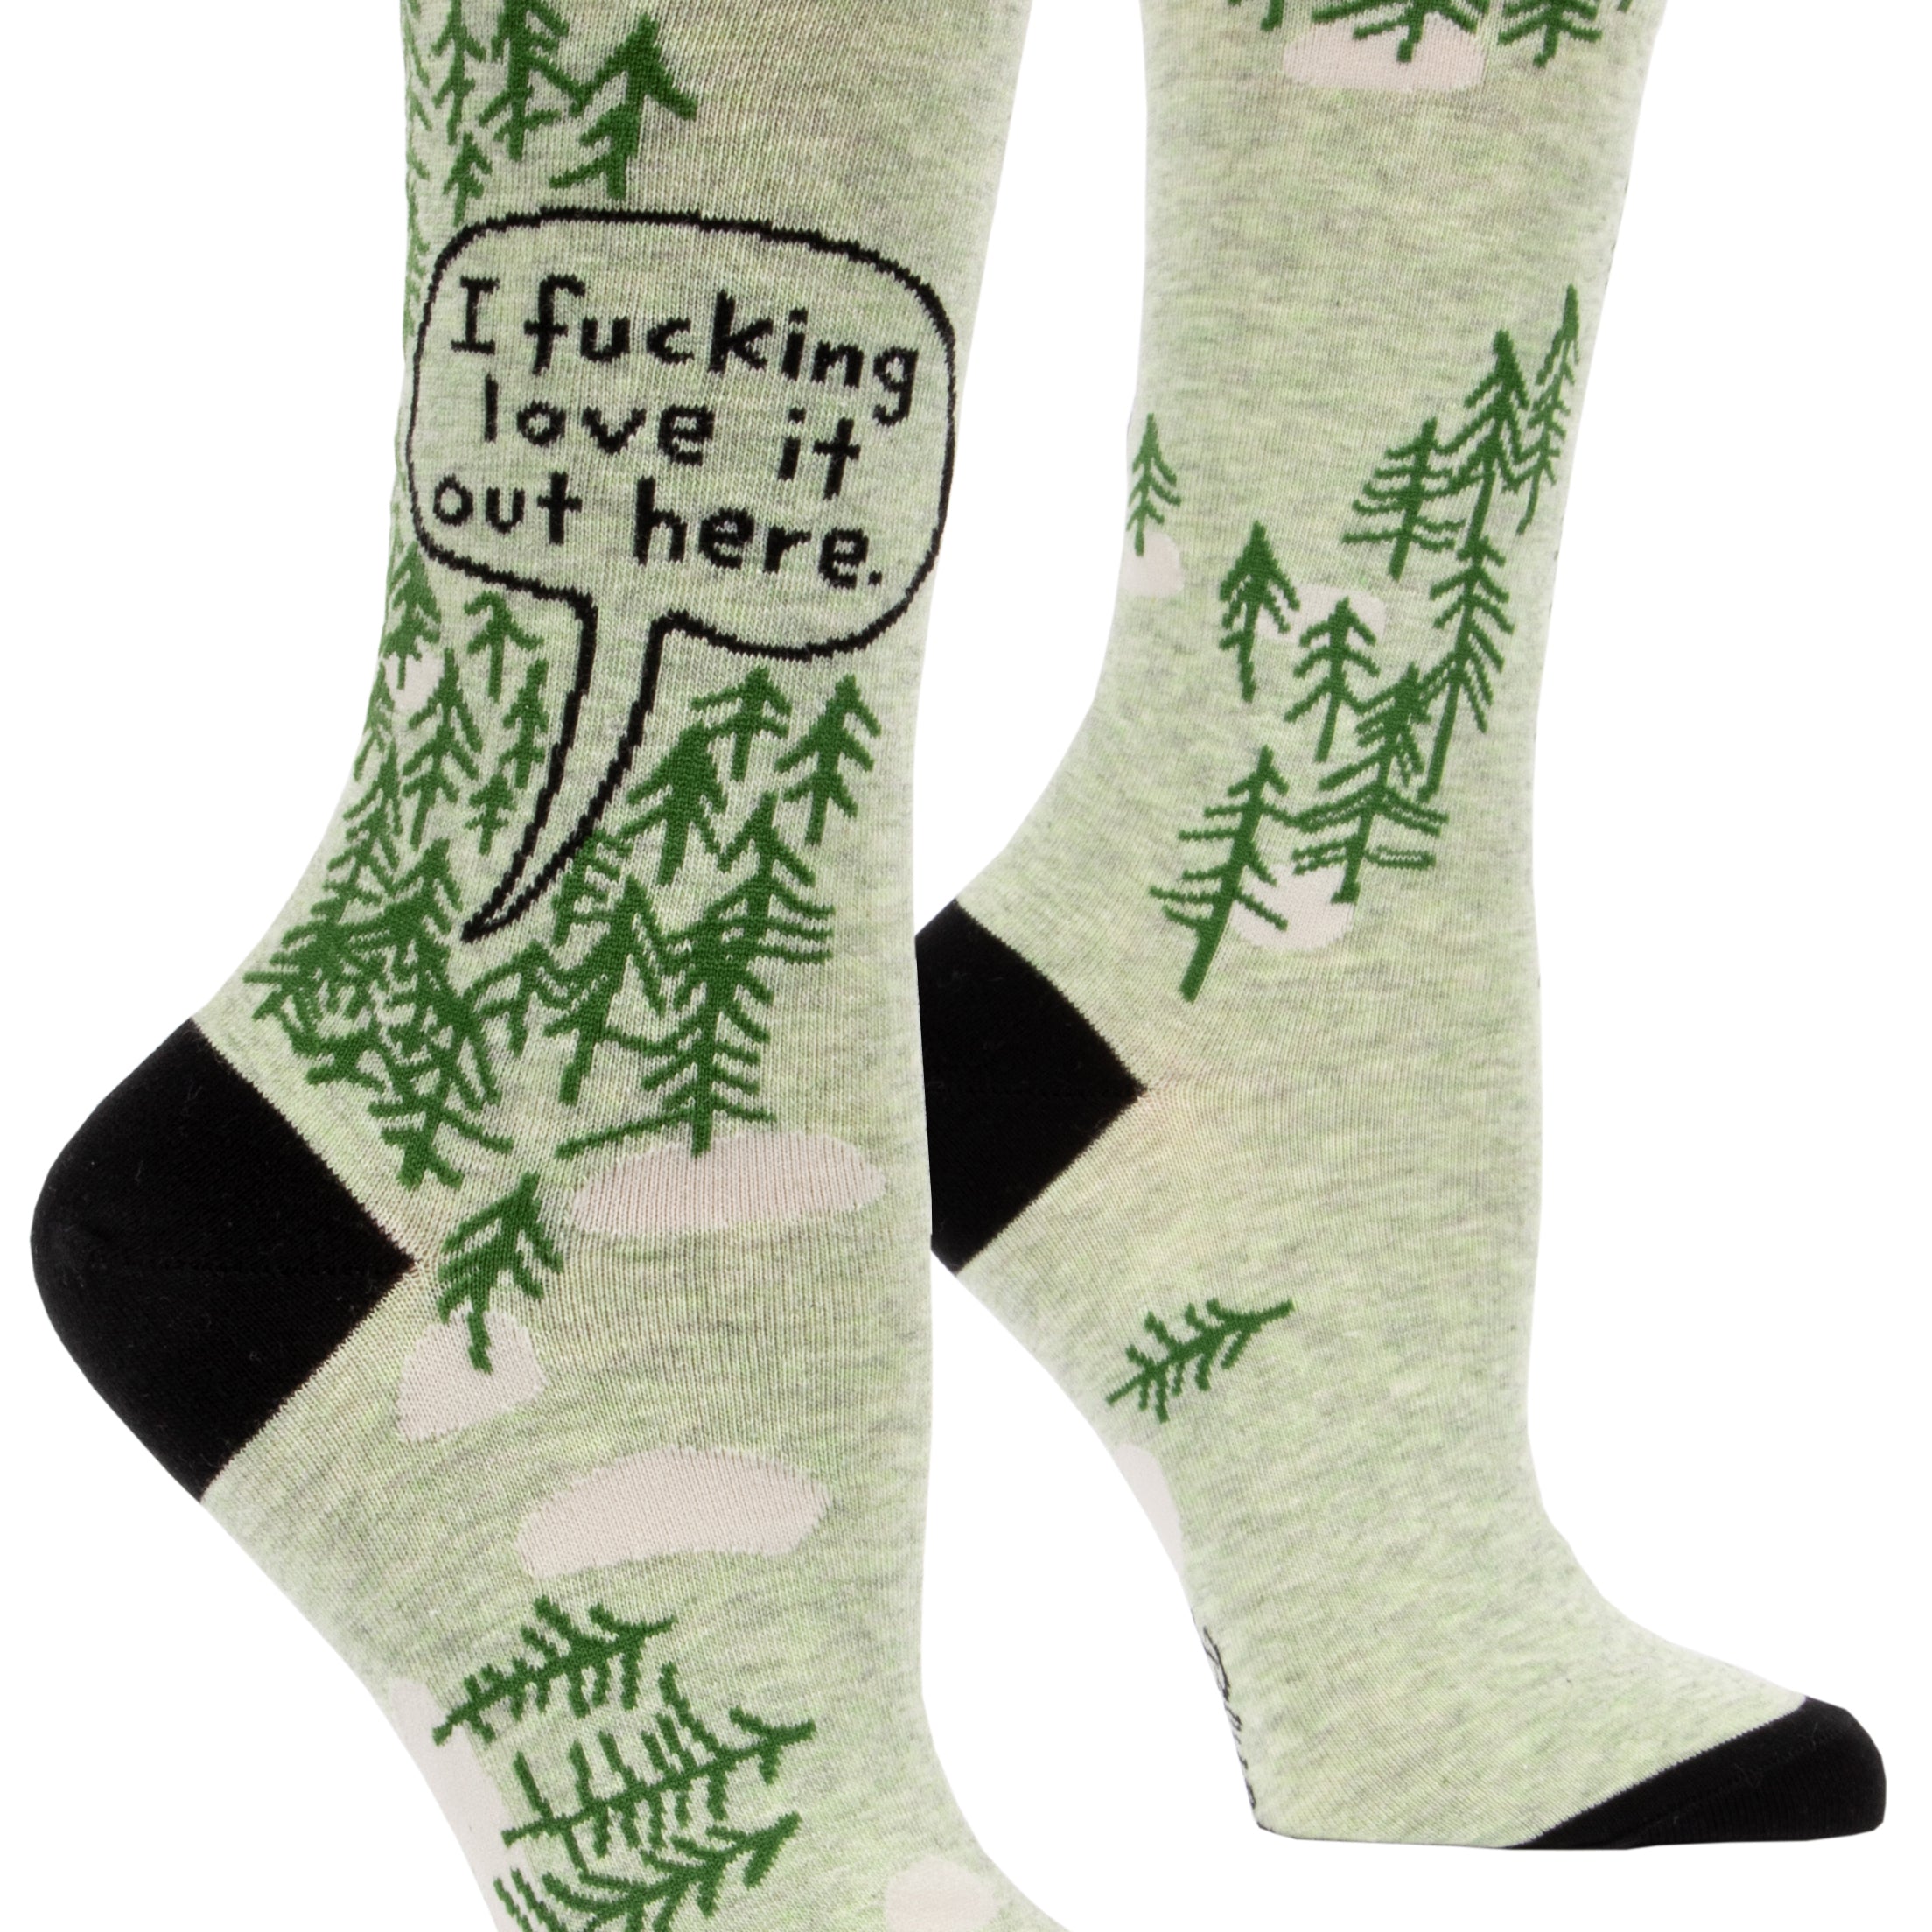 green socks with cartoon trees and black toa and heel on ankle in word bubble it says i fucking love it out here